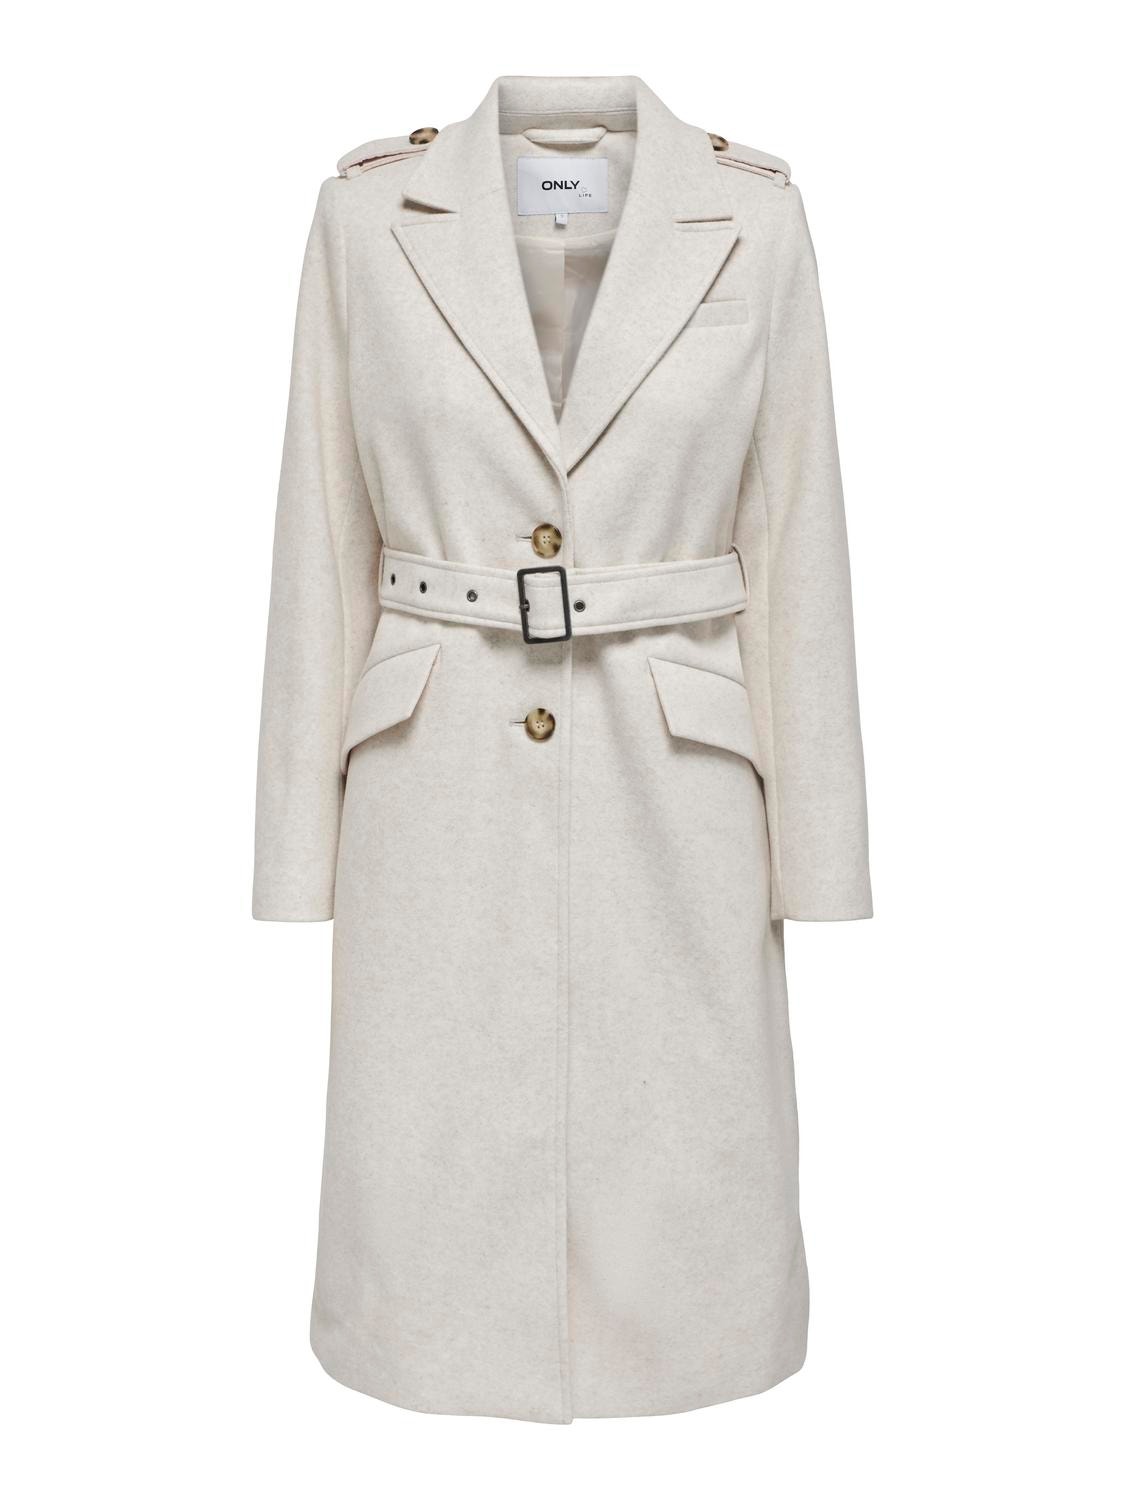 ONLY Jacket with belt in waist -Whisper White - 15292803